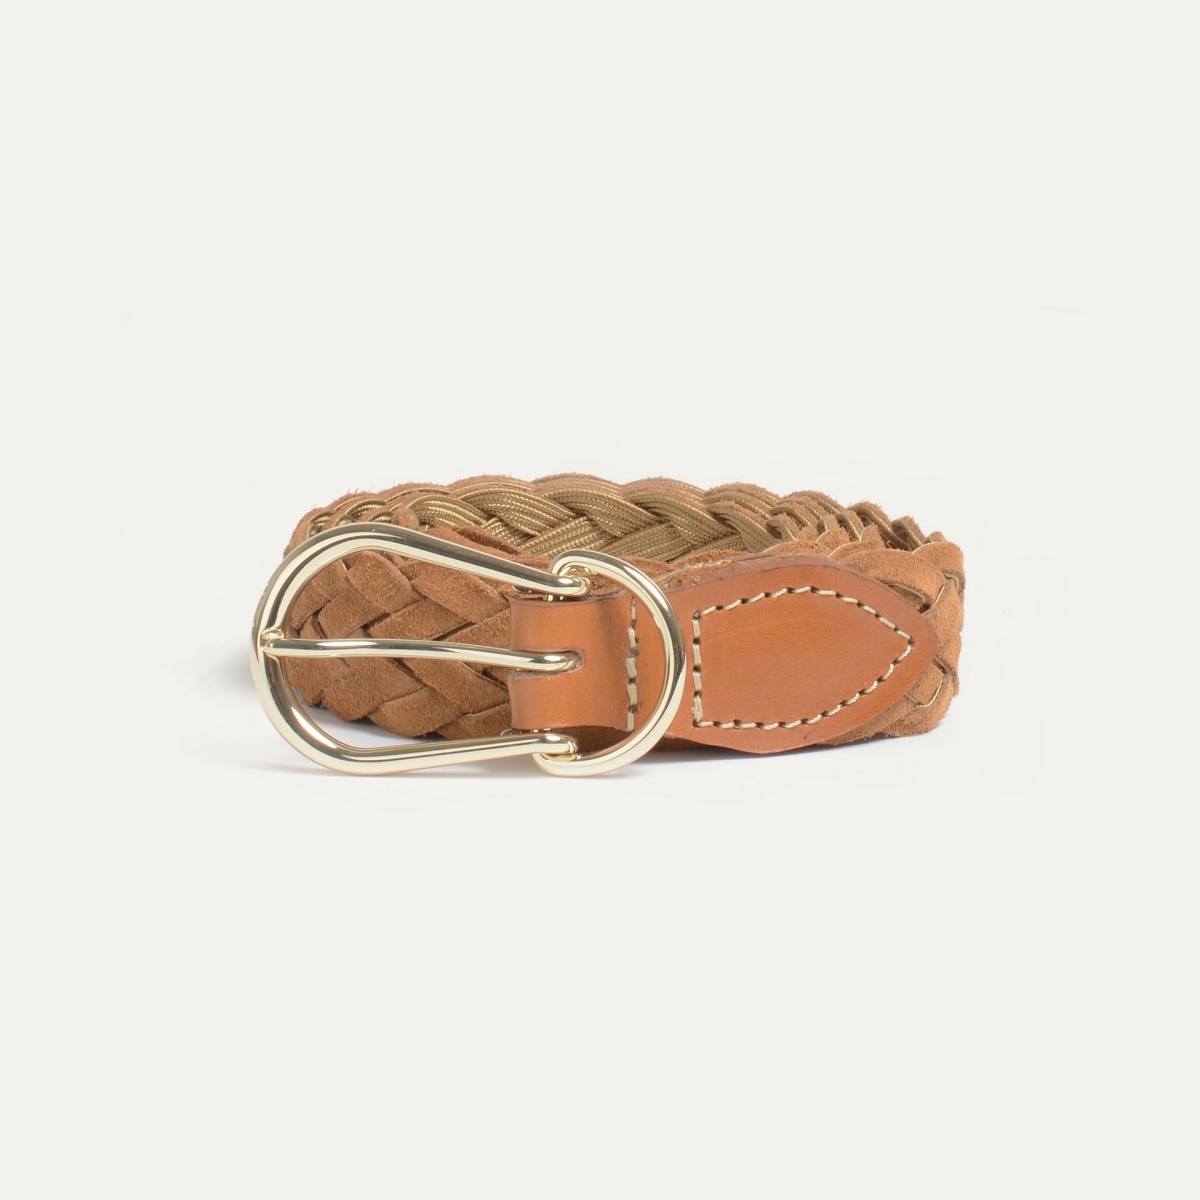 Cléo Belt / braided leather - Honey suede (image n°2)